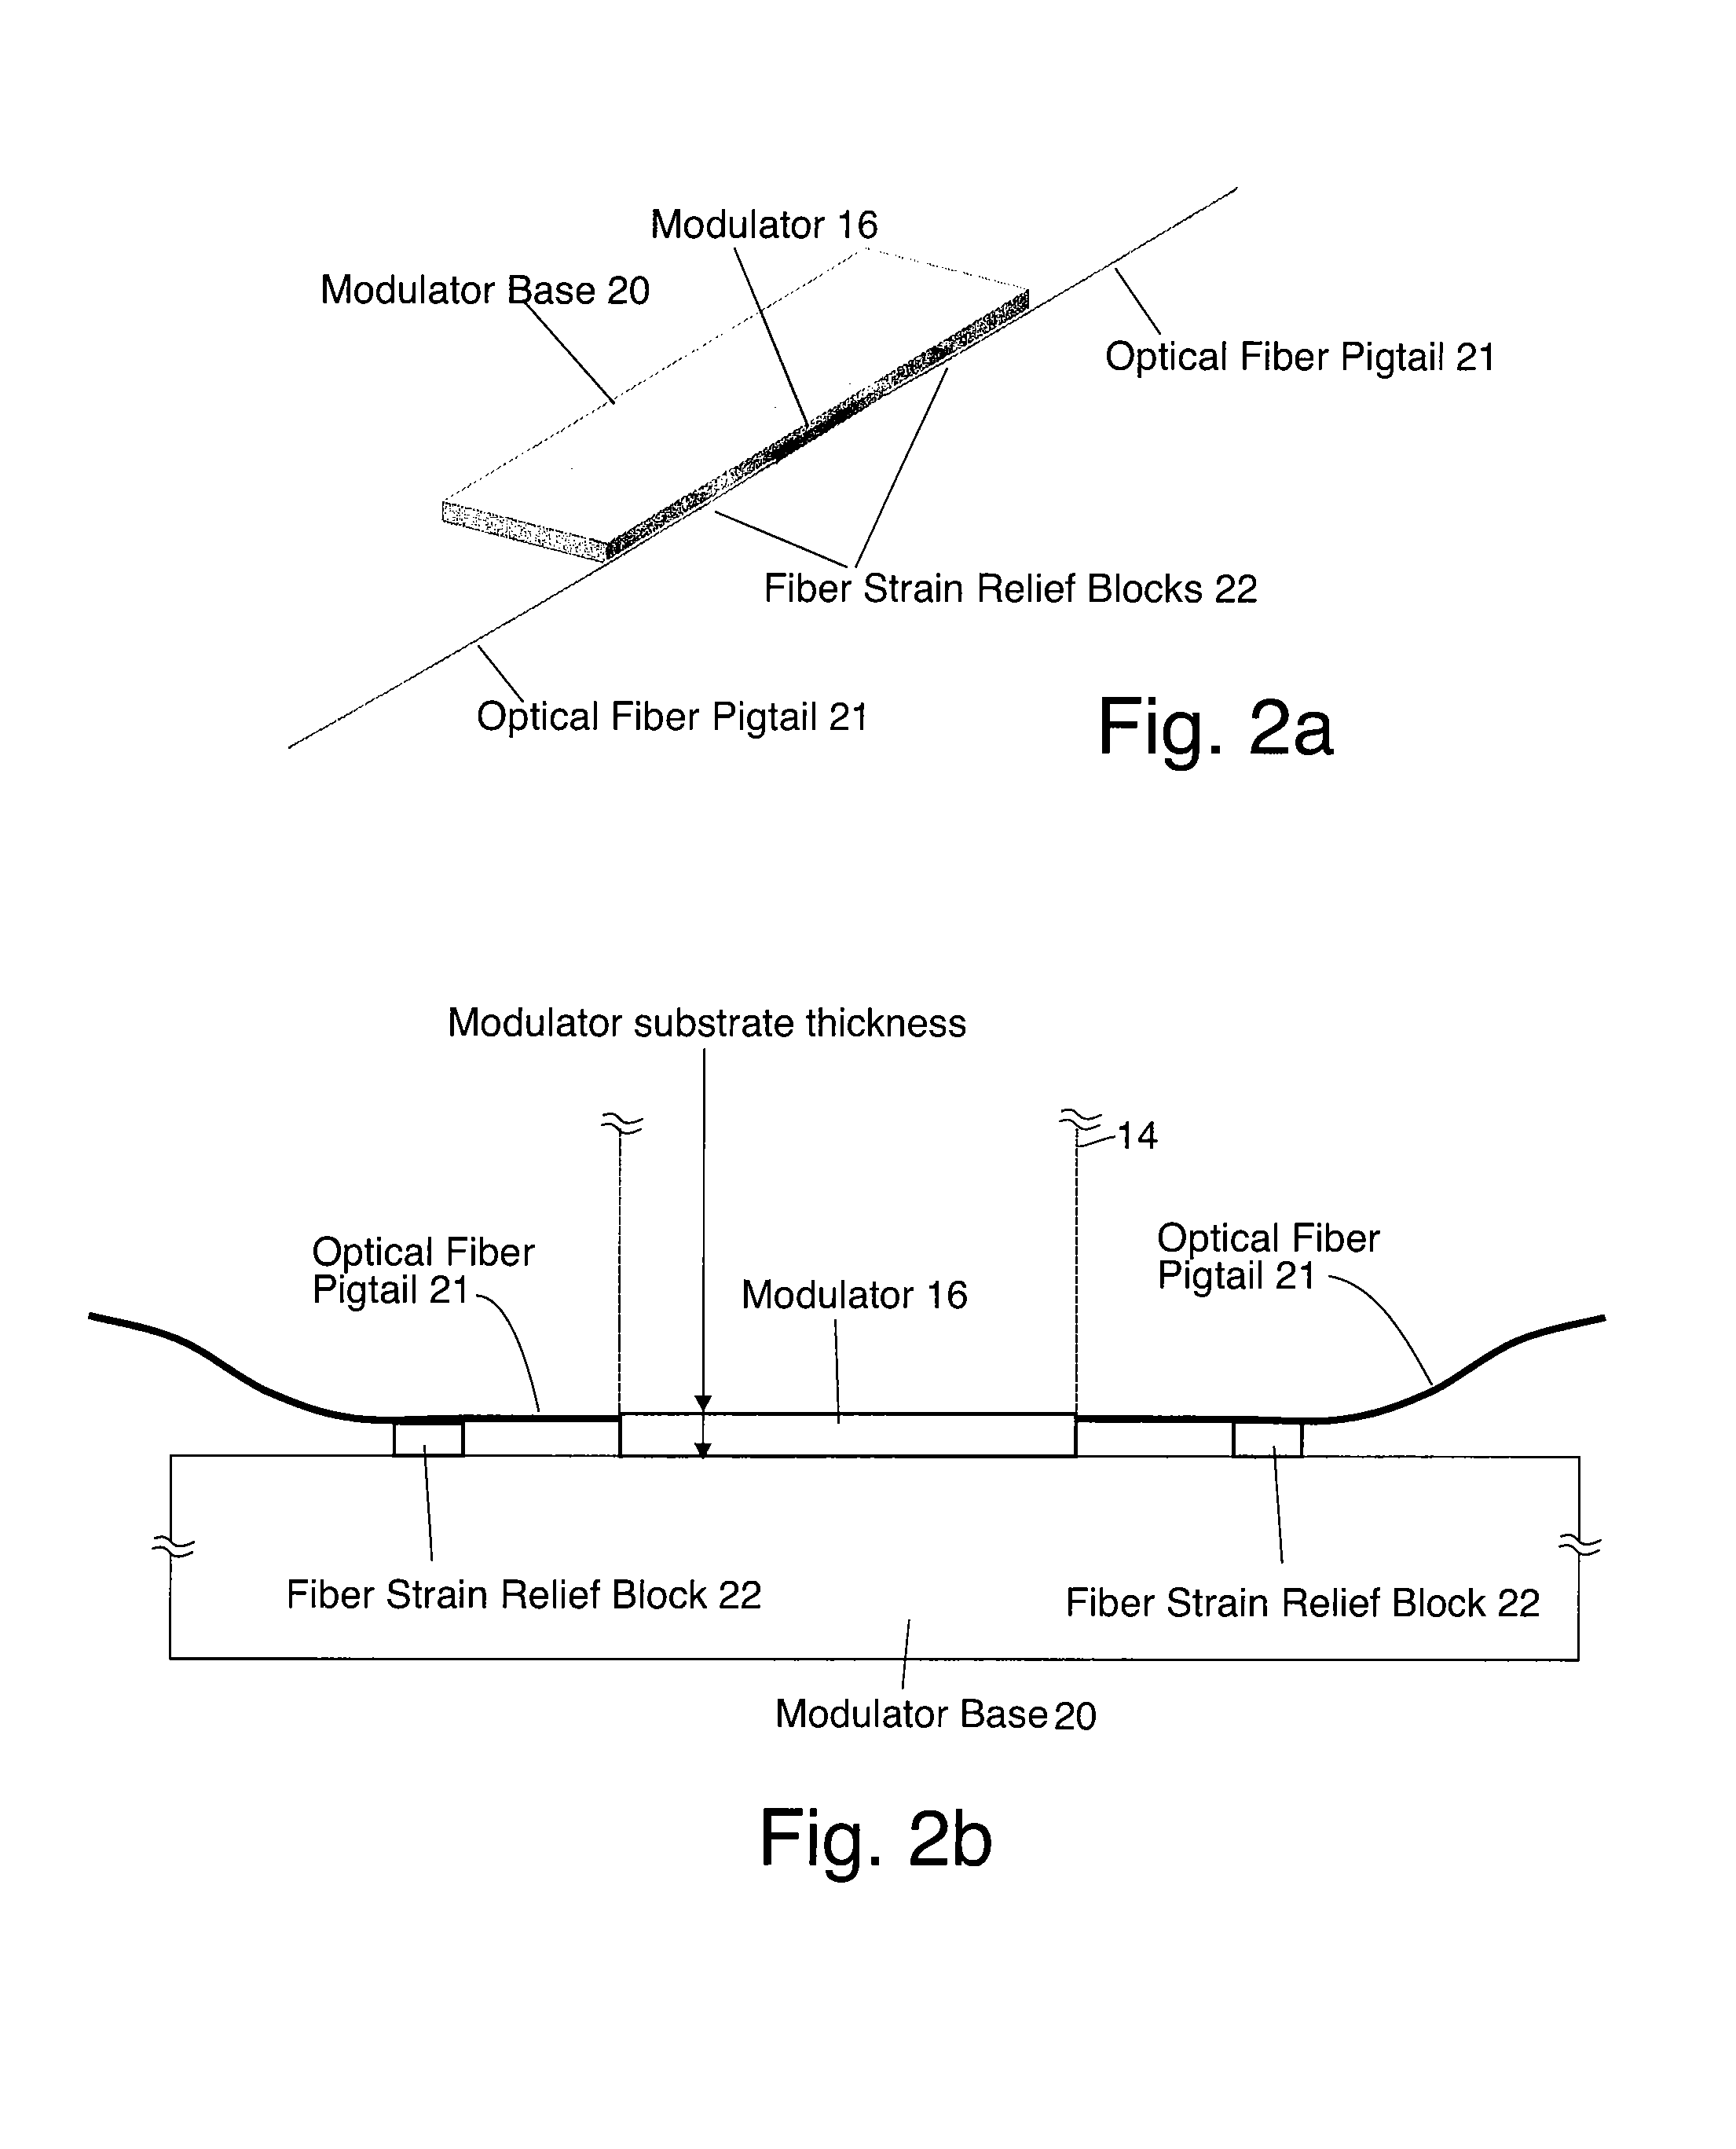 Waveguide assembly for a microwave receiver with electro-optic modulator